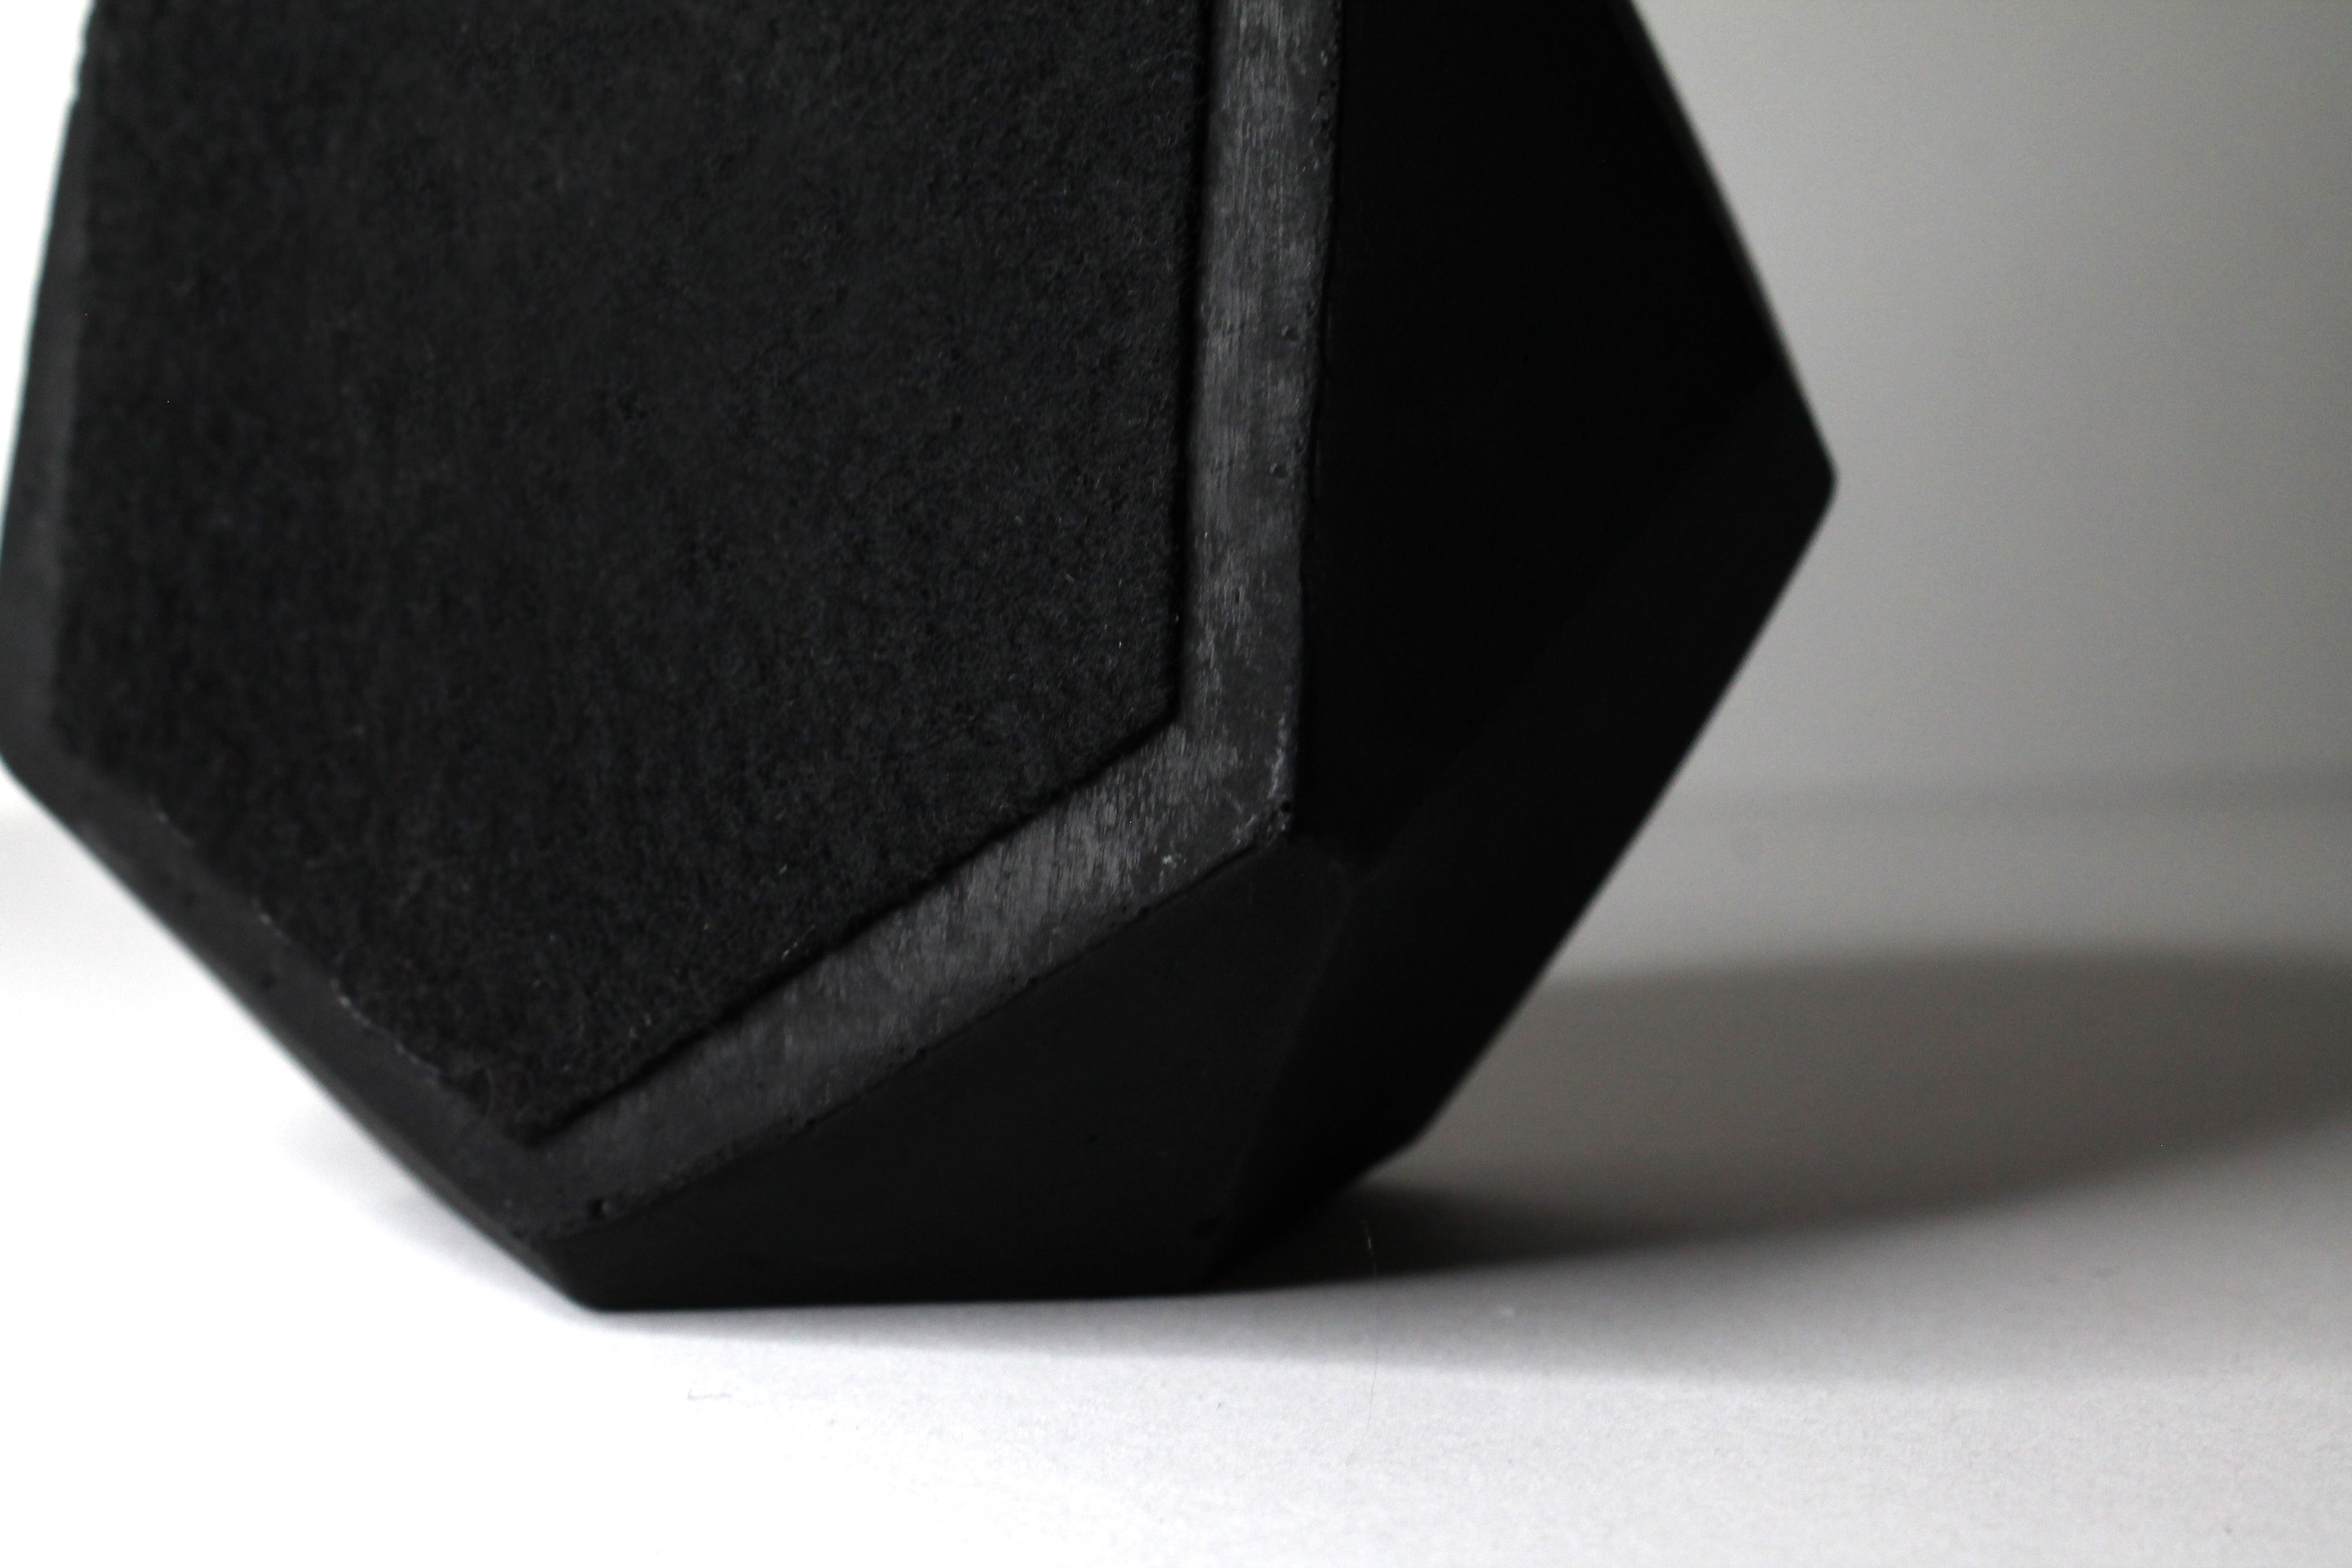 Black concrete candle with a felt bottom to protect your home.